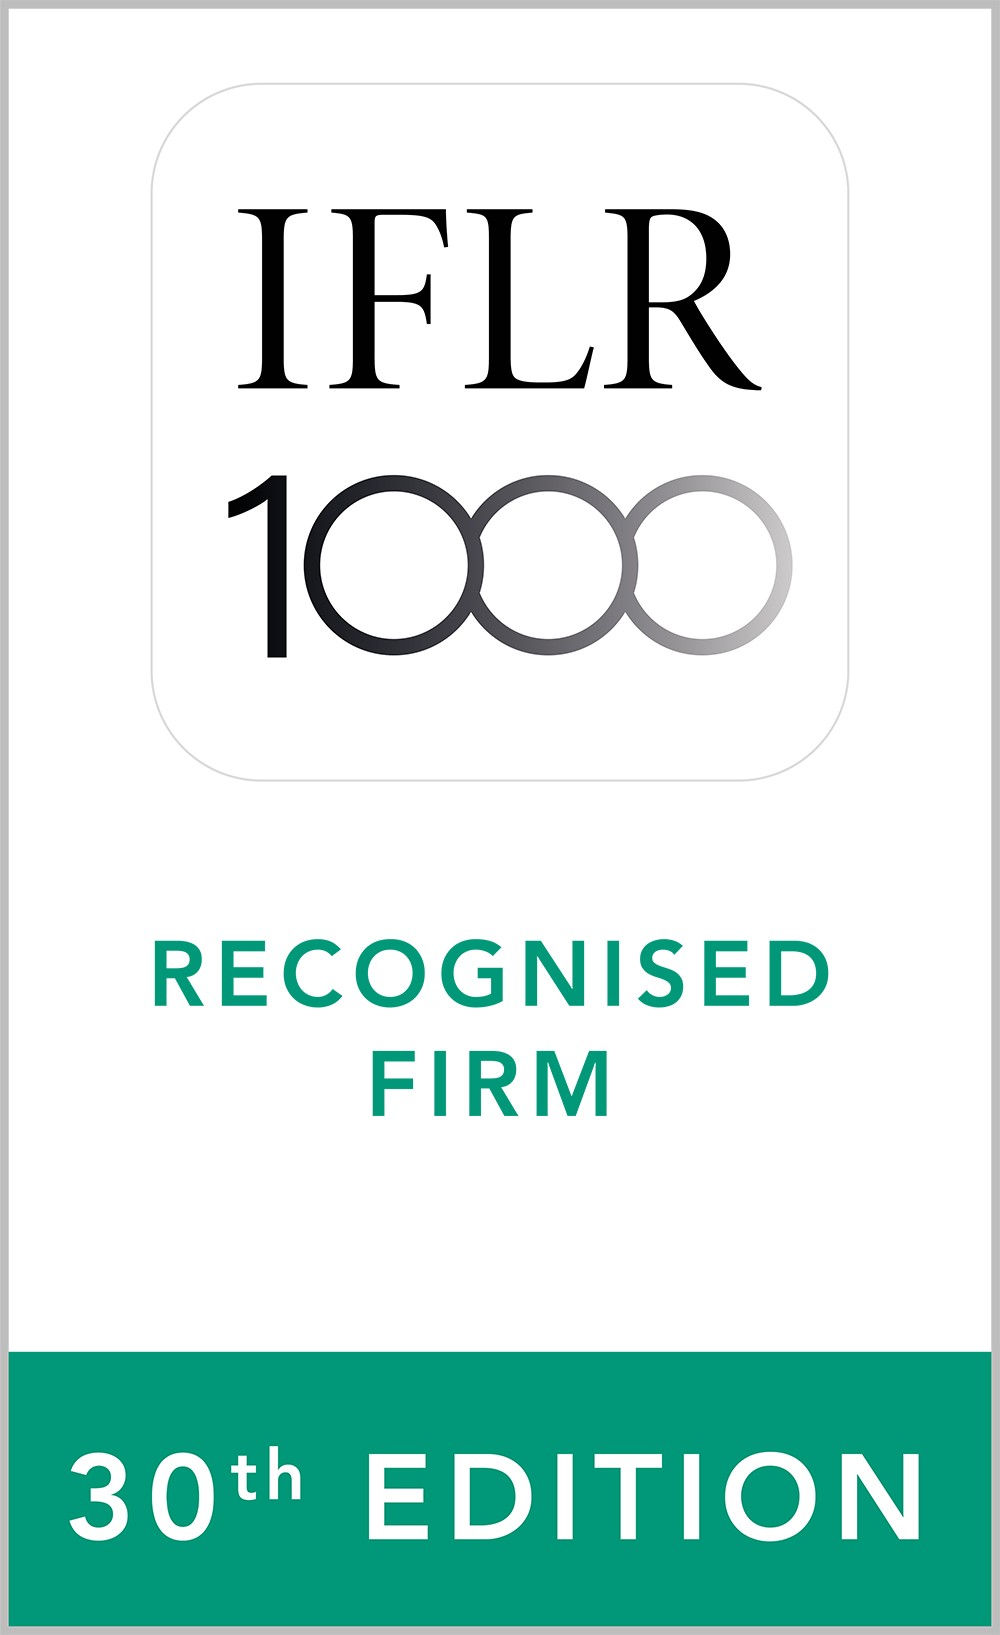 Ranked "Notable Firm" in Capital Markets: Equity, M&A , Restructuring and Insolvency by IFLR1000 2021